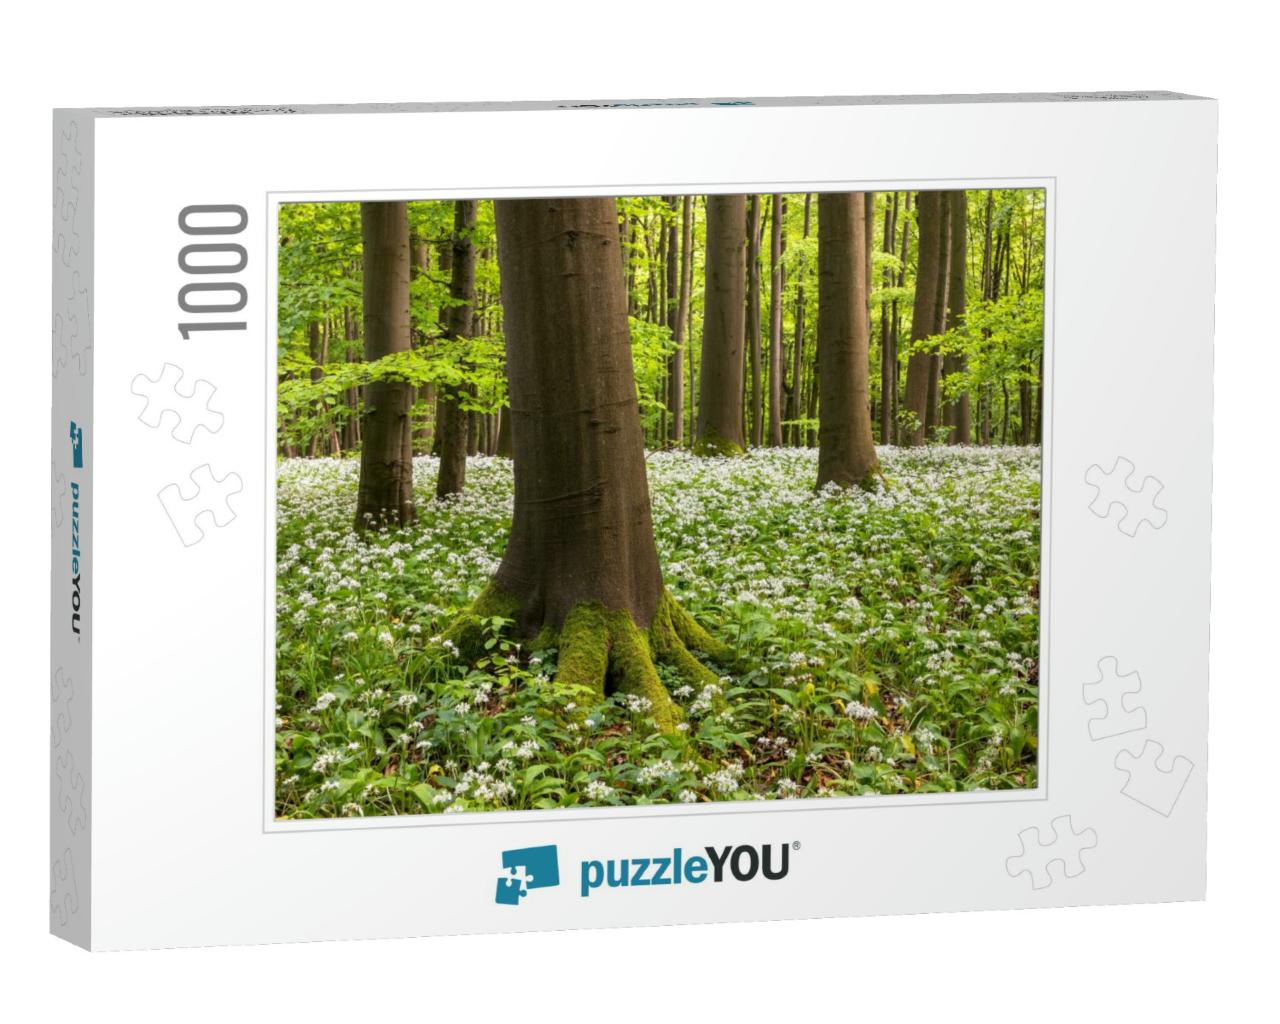 Wild Garlic Bloom in Hainich National Park, Thuringia, Ge... Jigsaw Puzzle with 1000 pieces